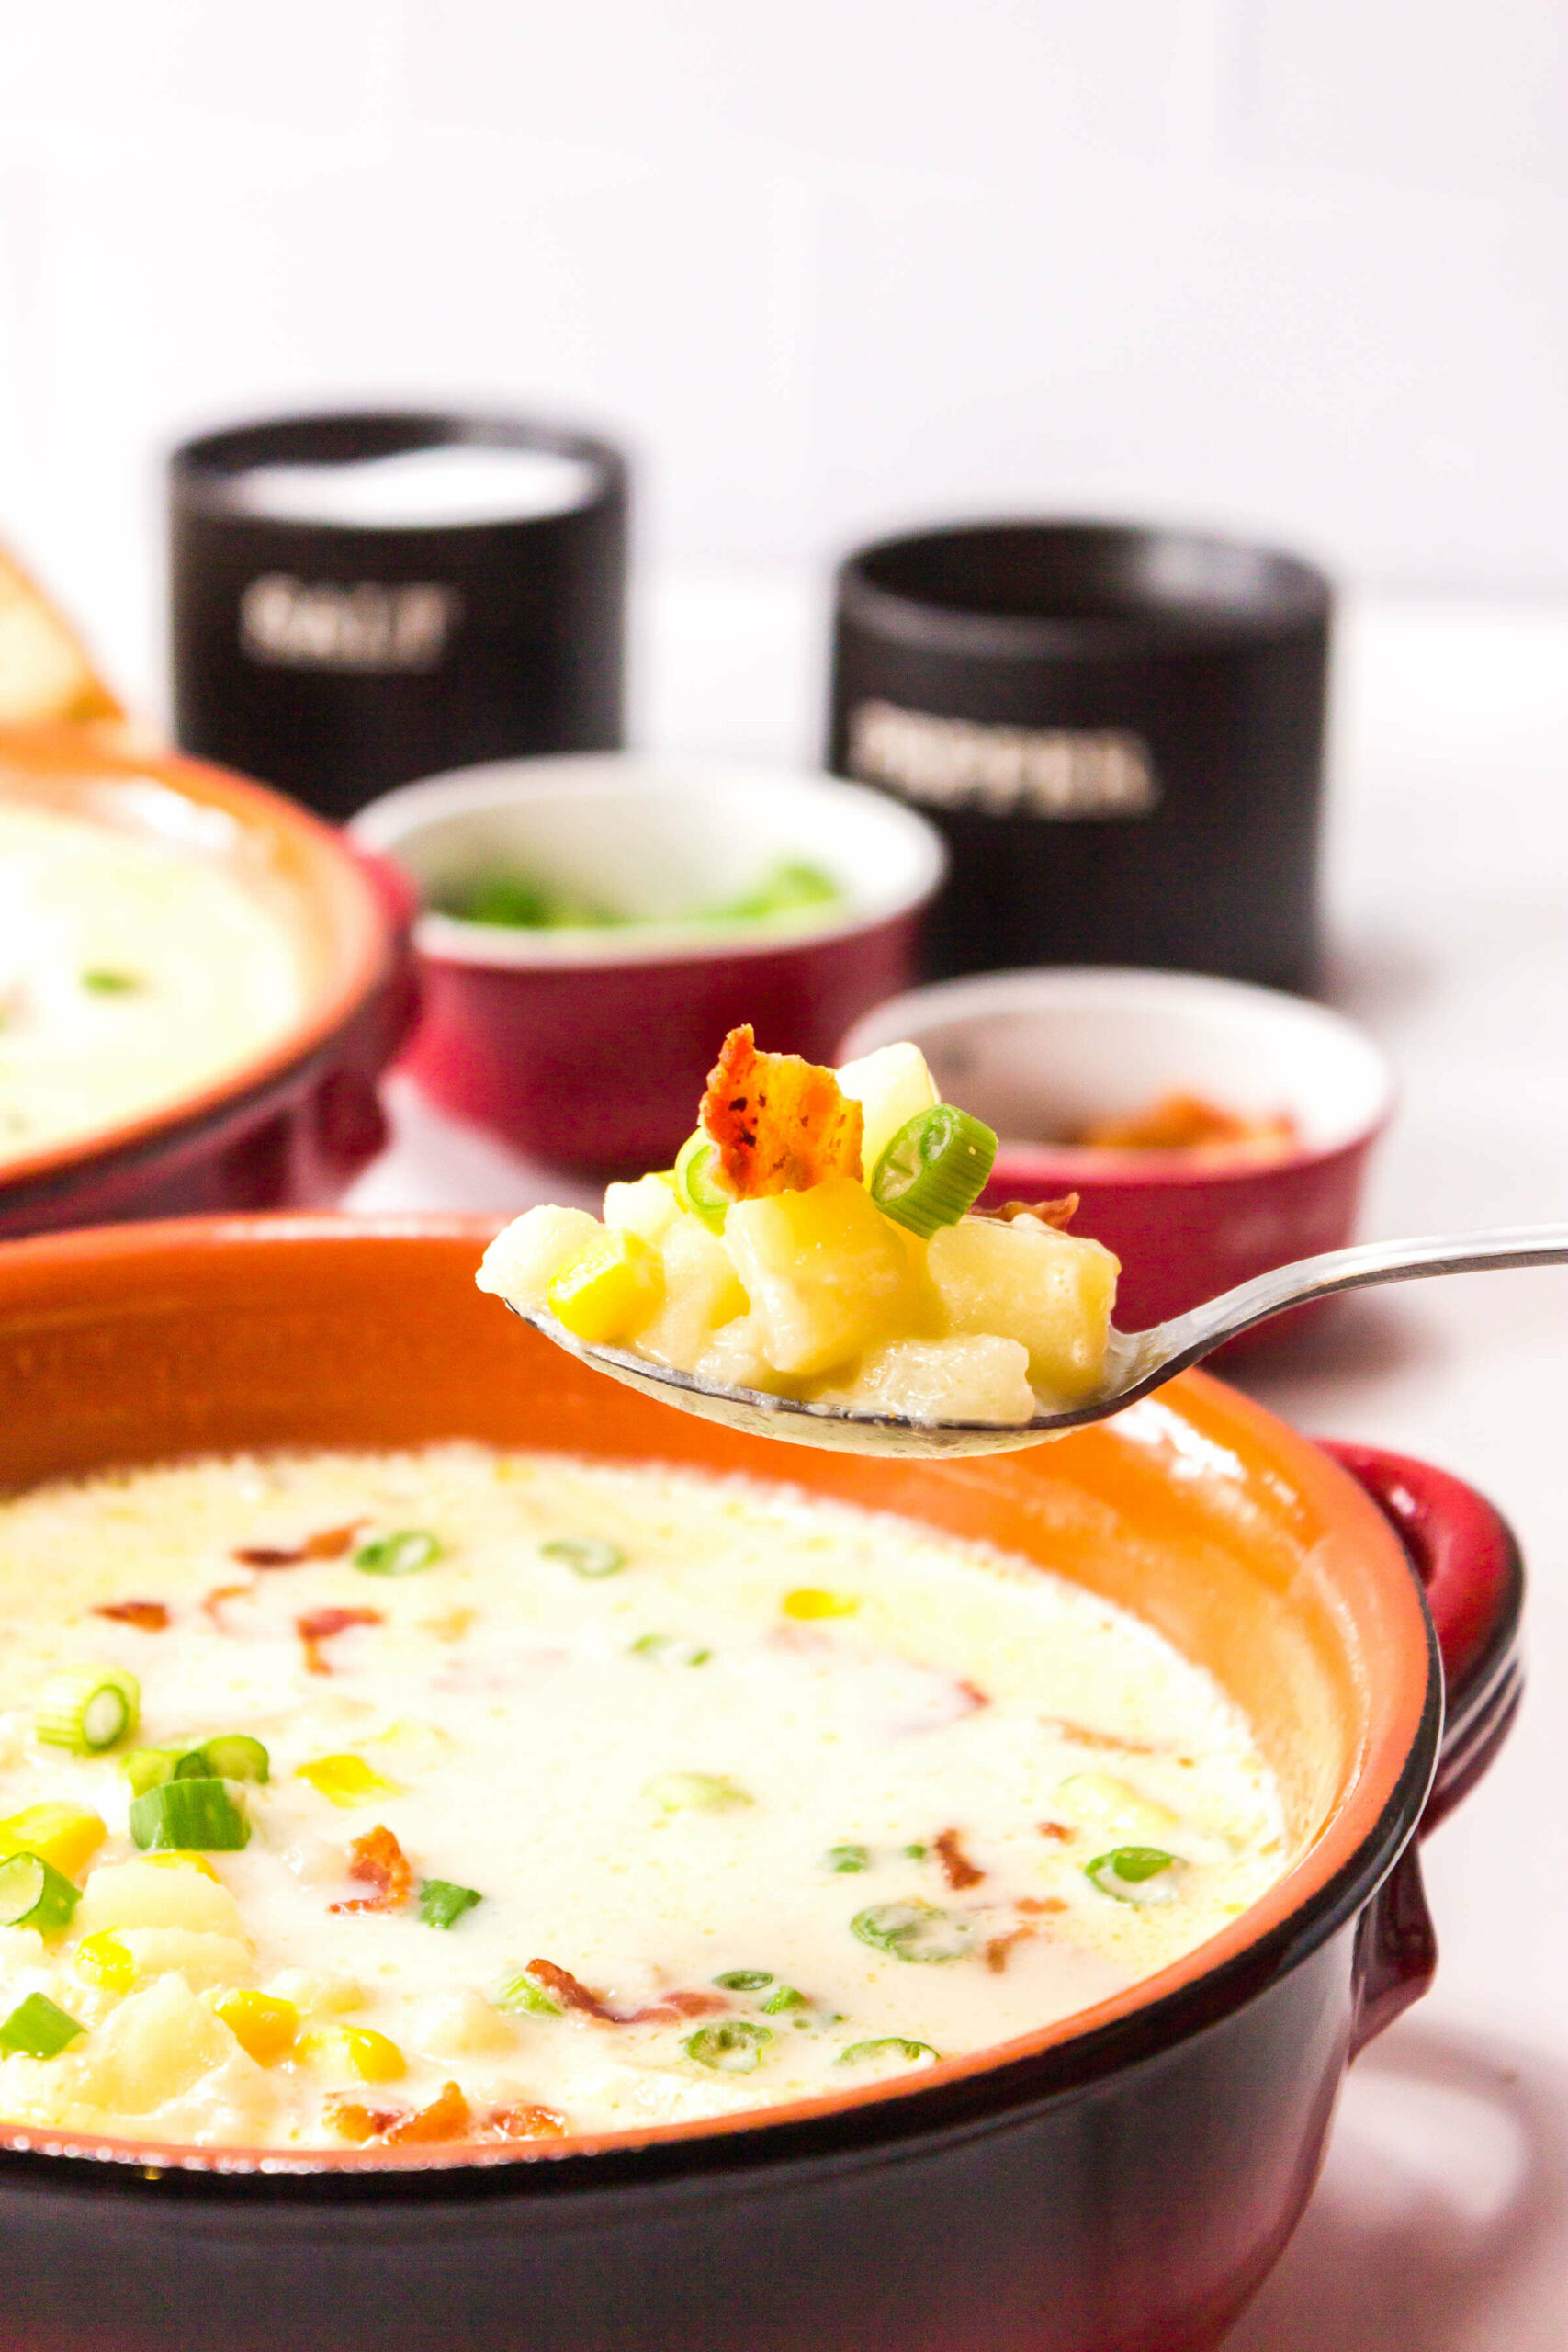 A heaping spoon of the chowder.